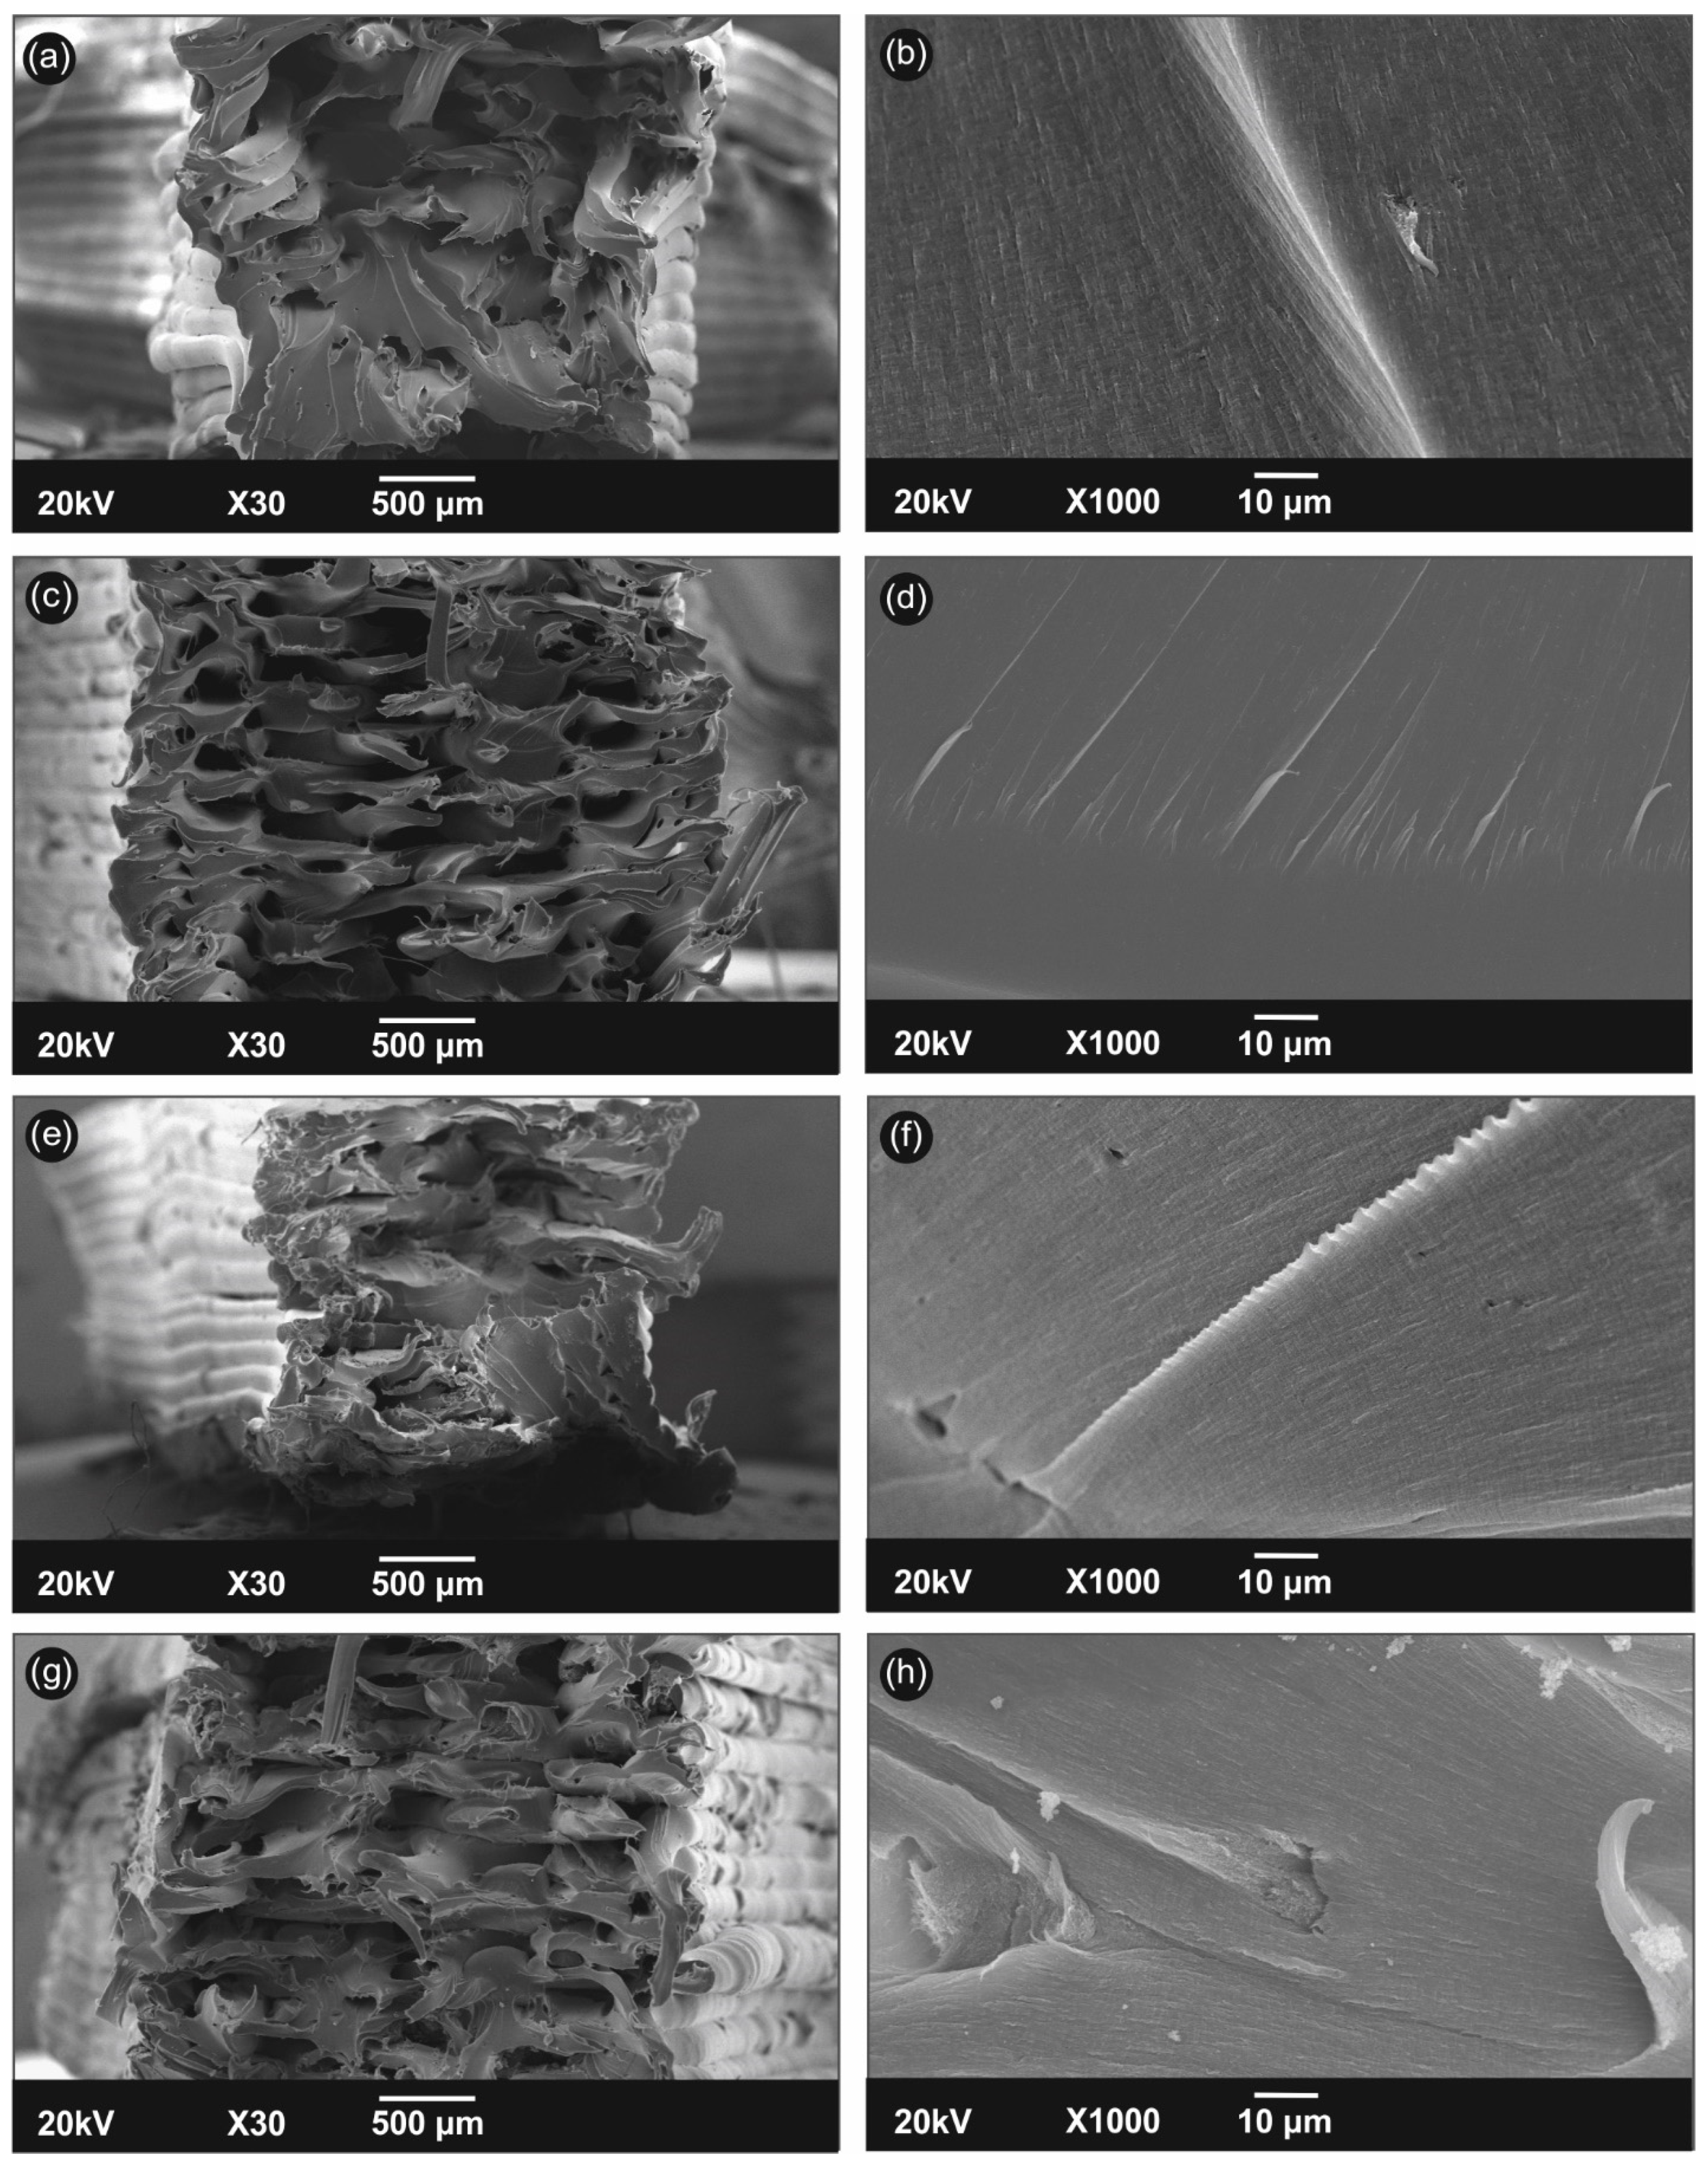 C Free Full Text Polyamide 12 Multiwalled Carbon Nanotube And Carbon Black Nanocomposites Manufactured By 3d Printing Fused Filament Fabrication A Comparison Of The Electrical Thermoelectric And Mechanical Properties Html